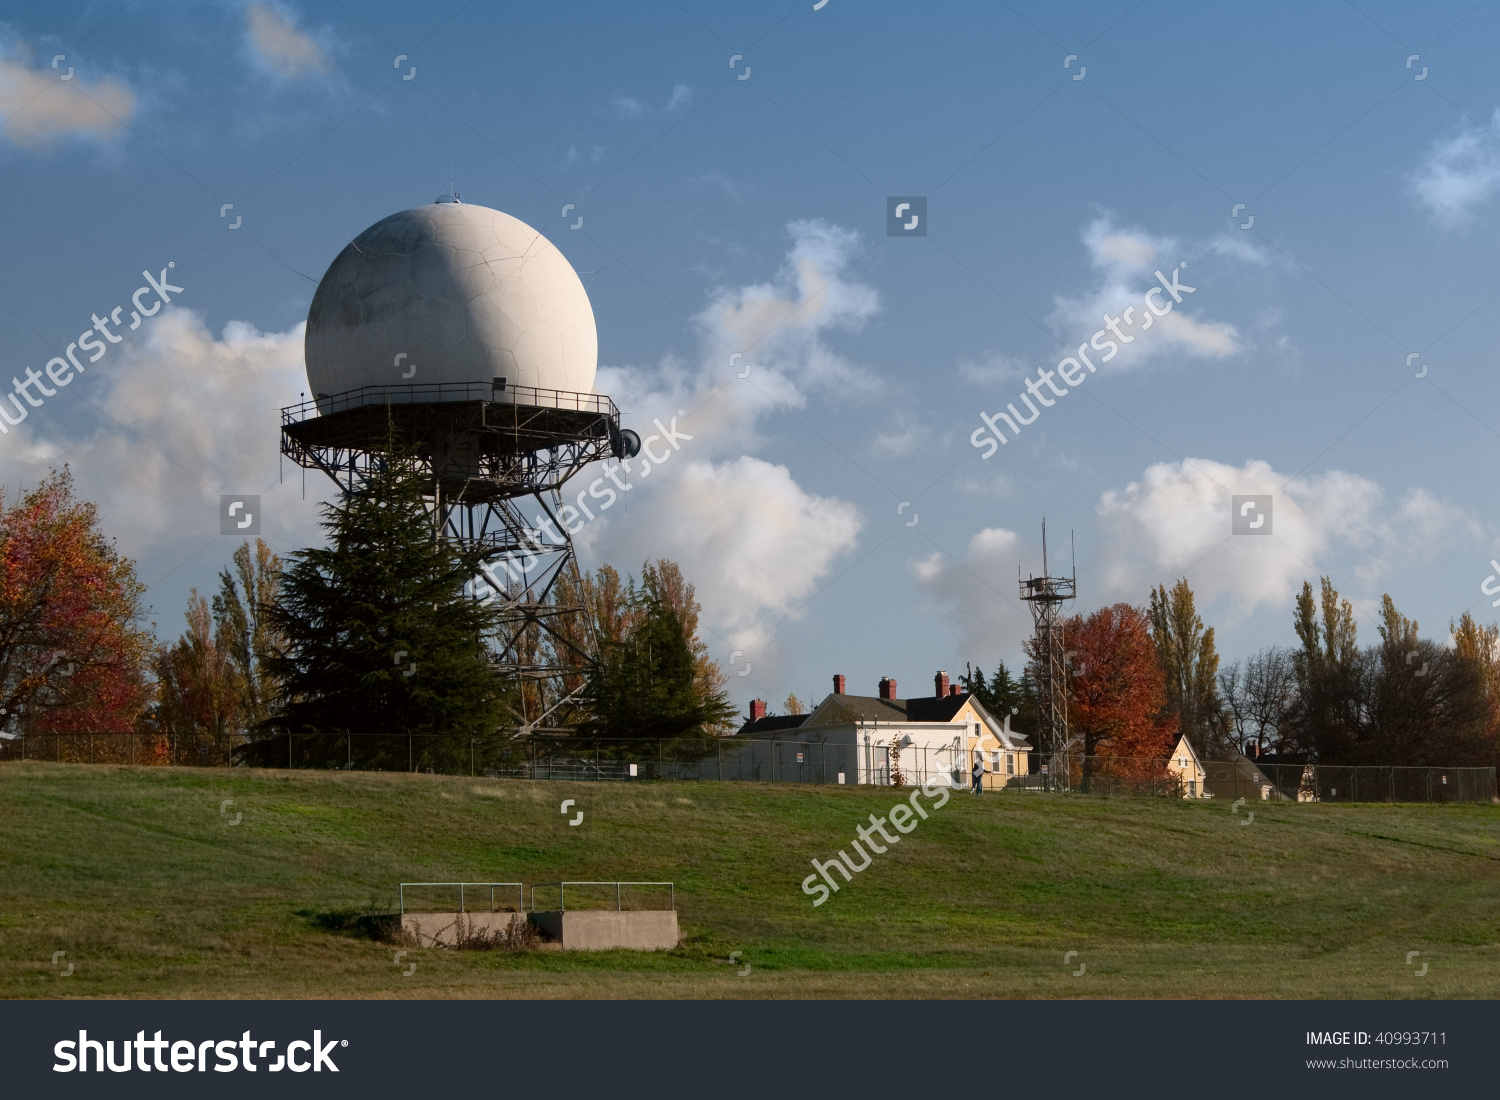 An Faa Radar Dome, Built In 1959, At Fort Lawton, A Closed United.